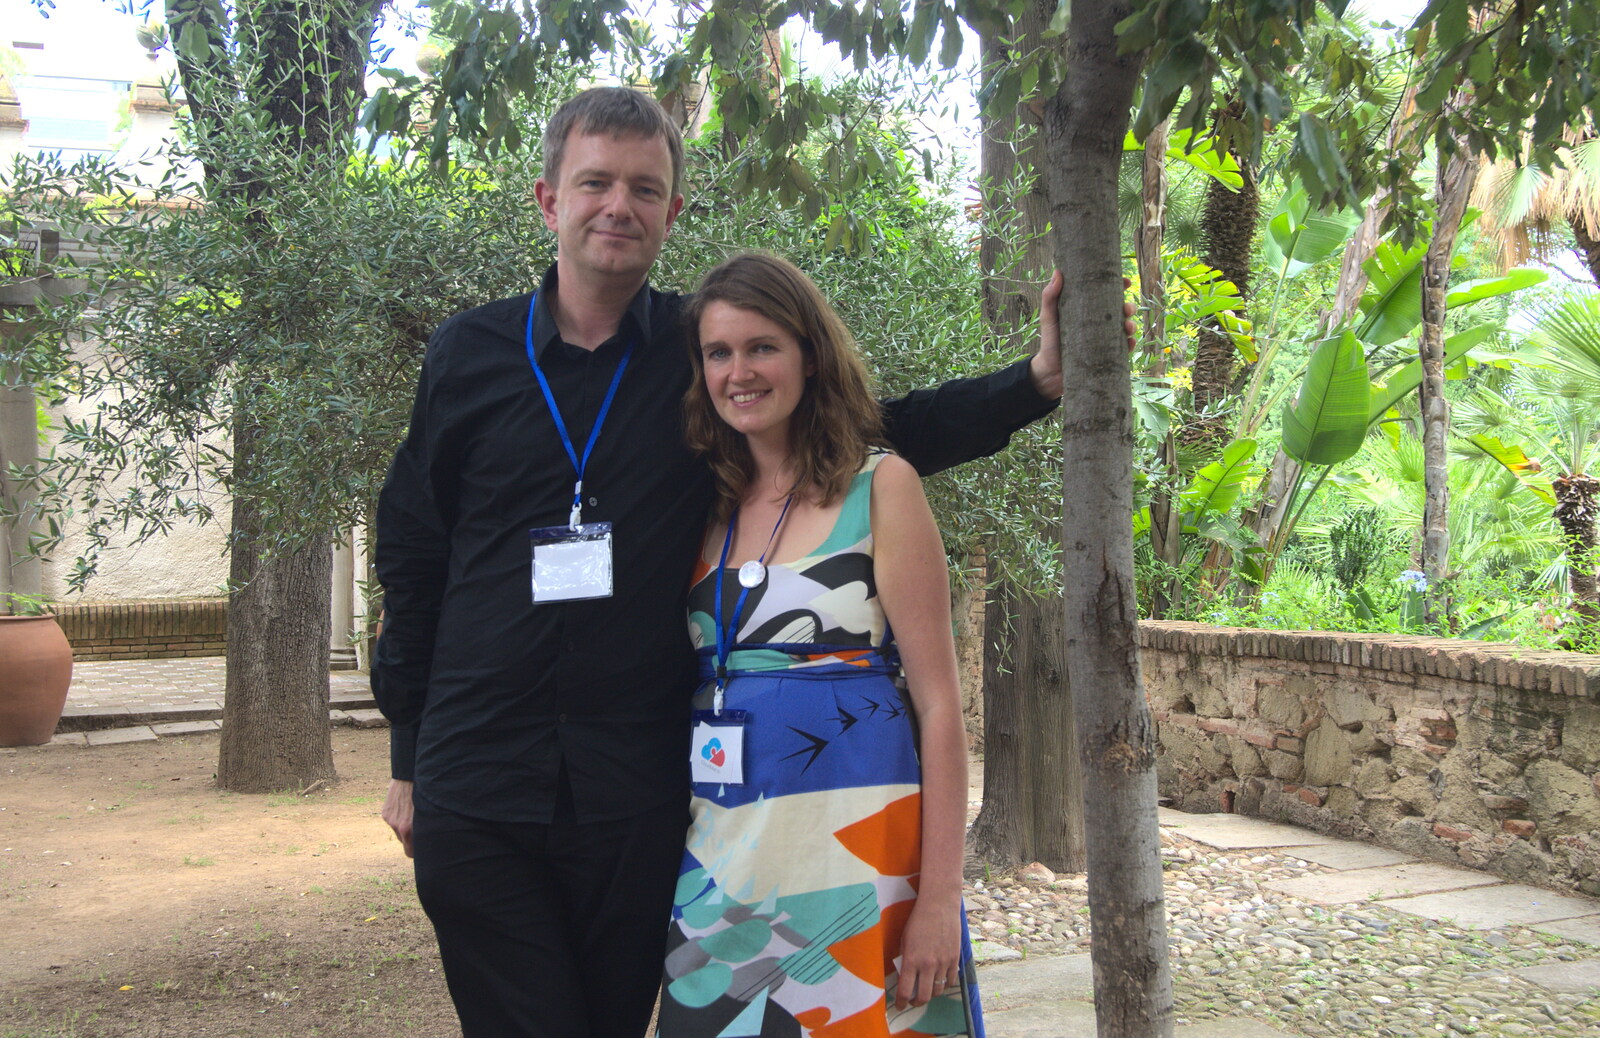 Nosher and Isobel from The Open Education Challenge, Barcelona, Catalonia - 13th July 2014